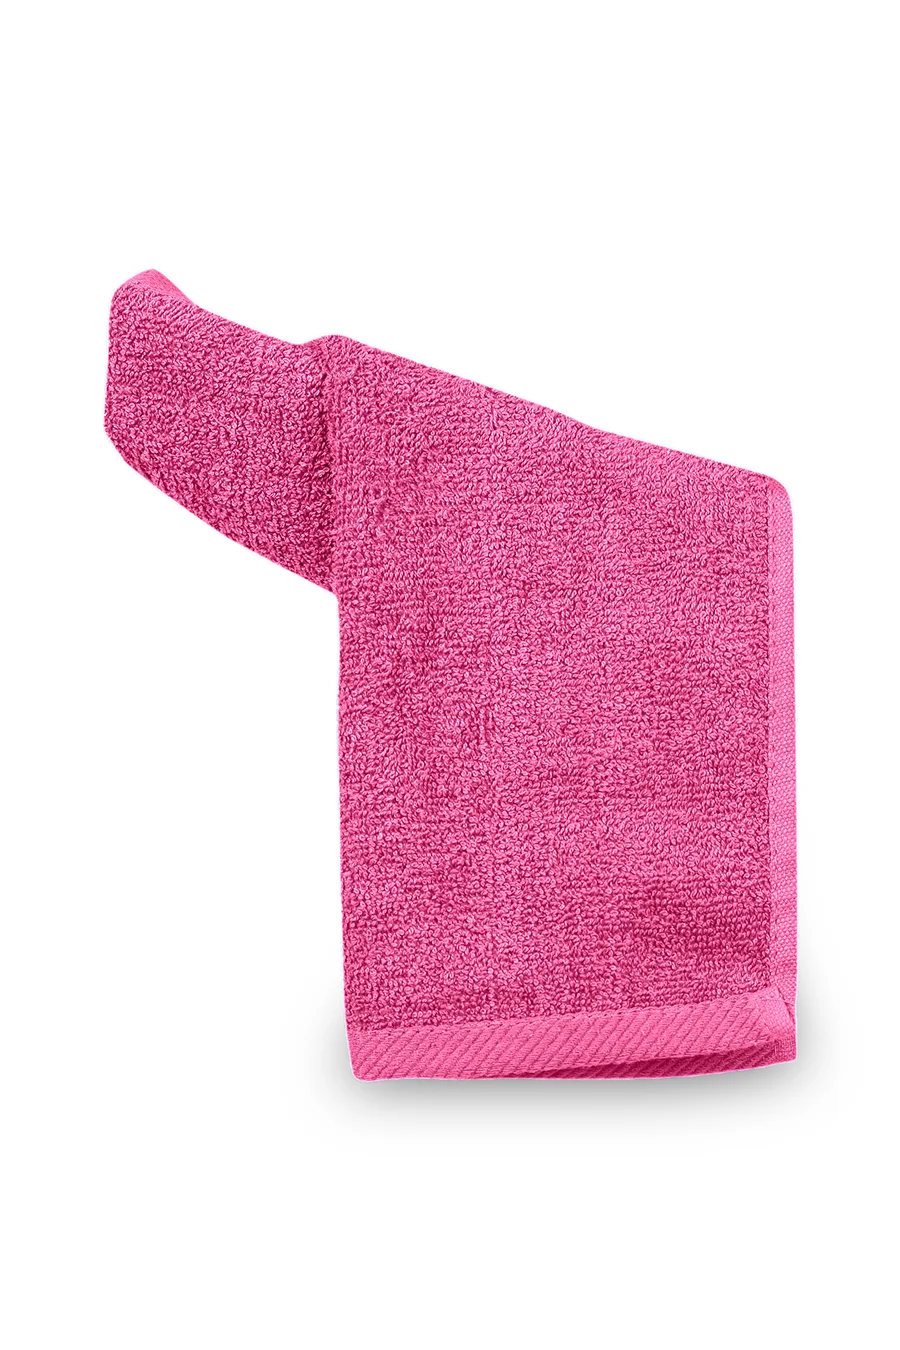 Budget Ralley Fingertip towel hand towel in azalea pink color qtees manufacturers of bags towels usa